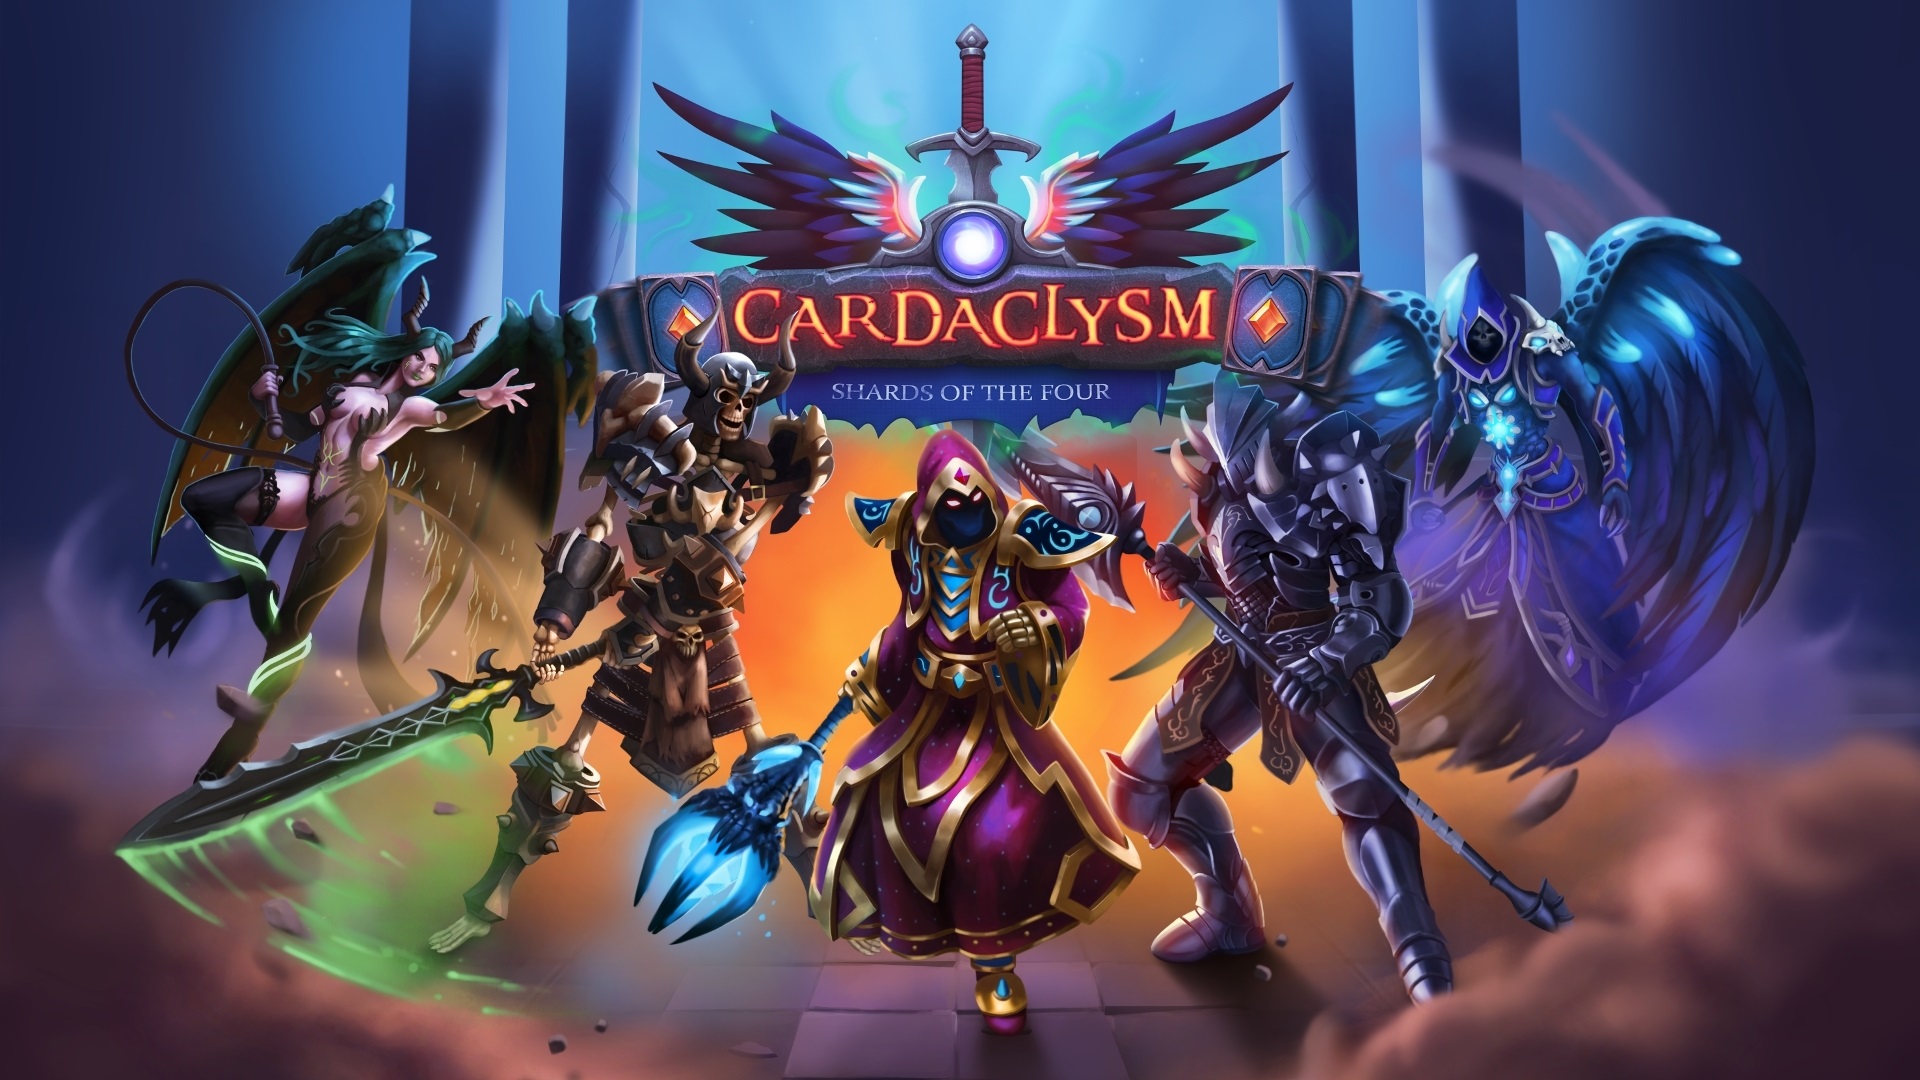 Promo image of Cardaclysm